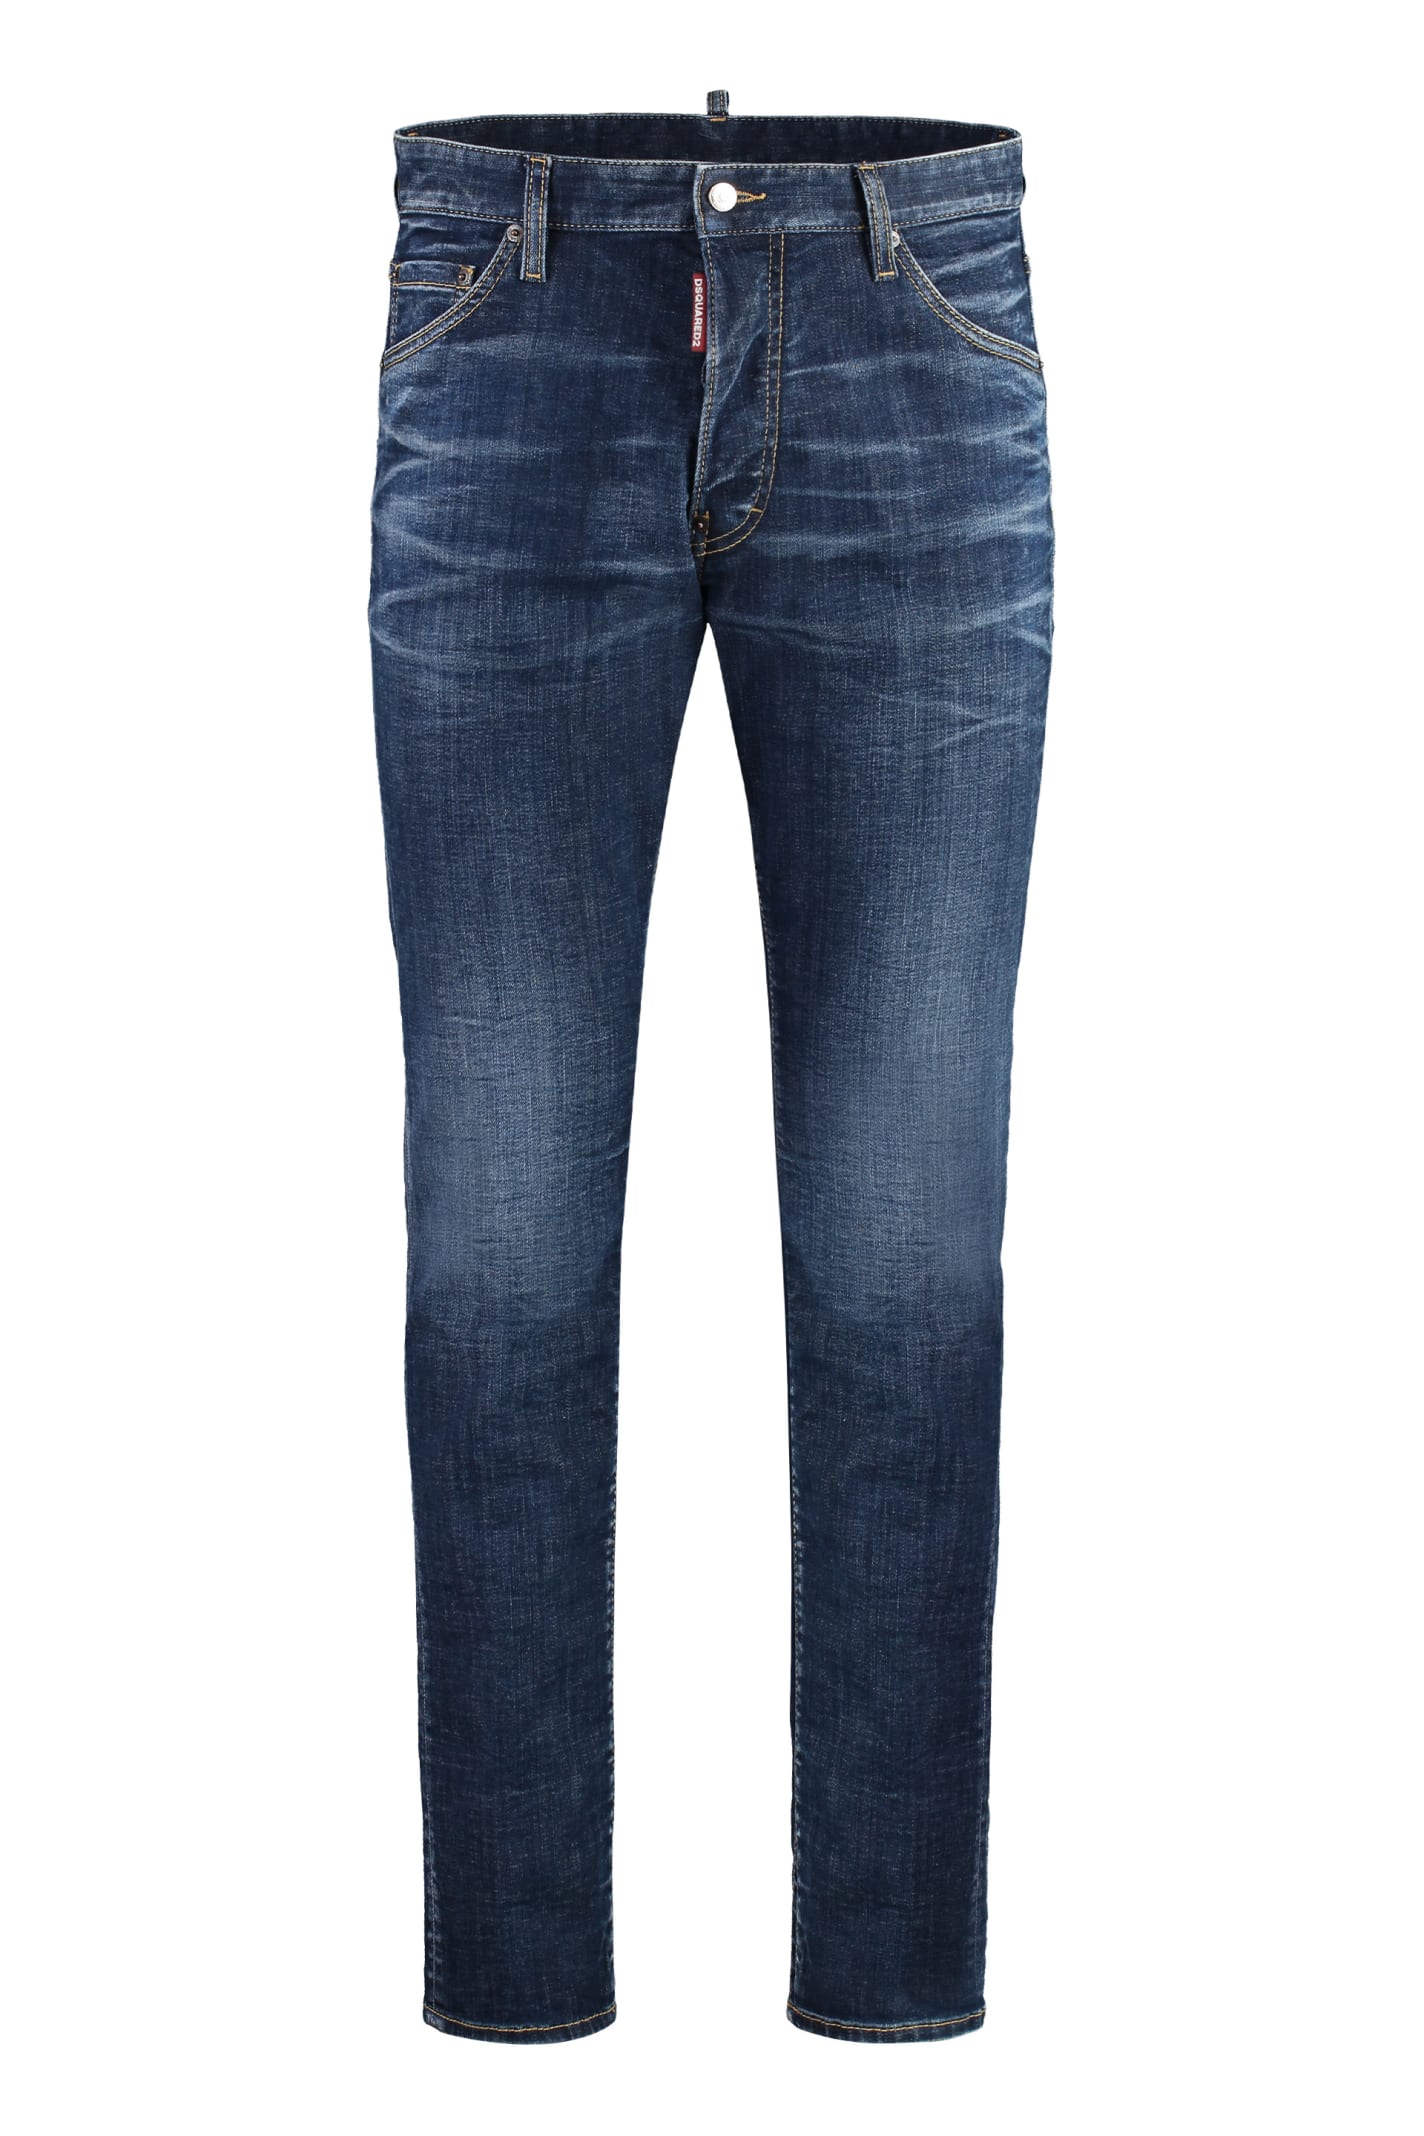 Dsquared2 Cool-guy Jeans